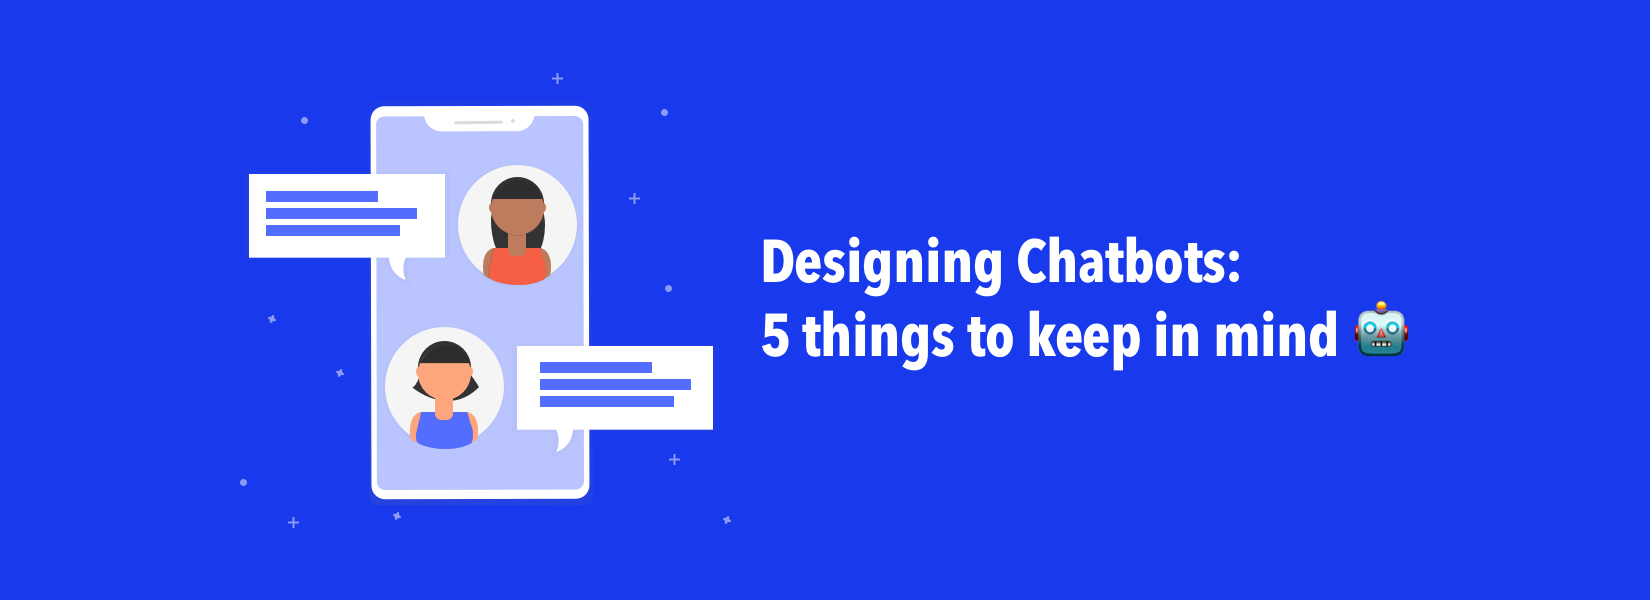 Designing Chatbots: 5 things to keep in mind